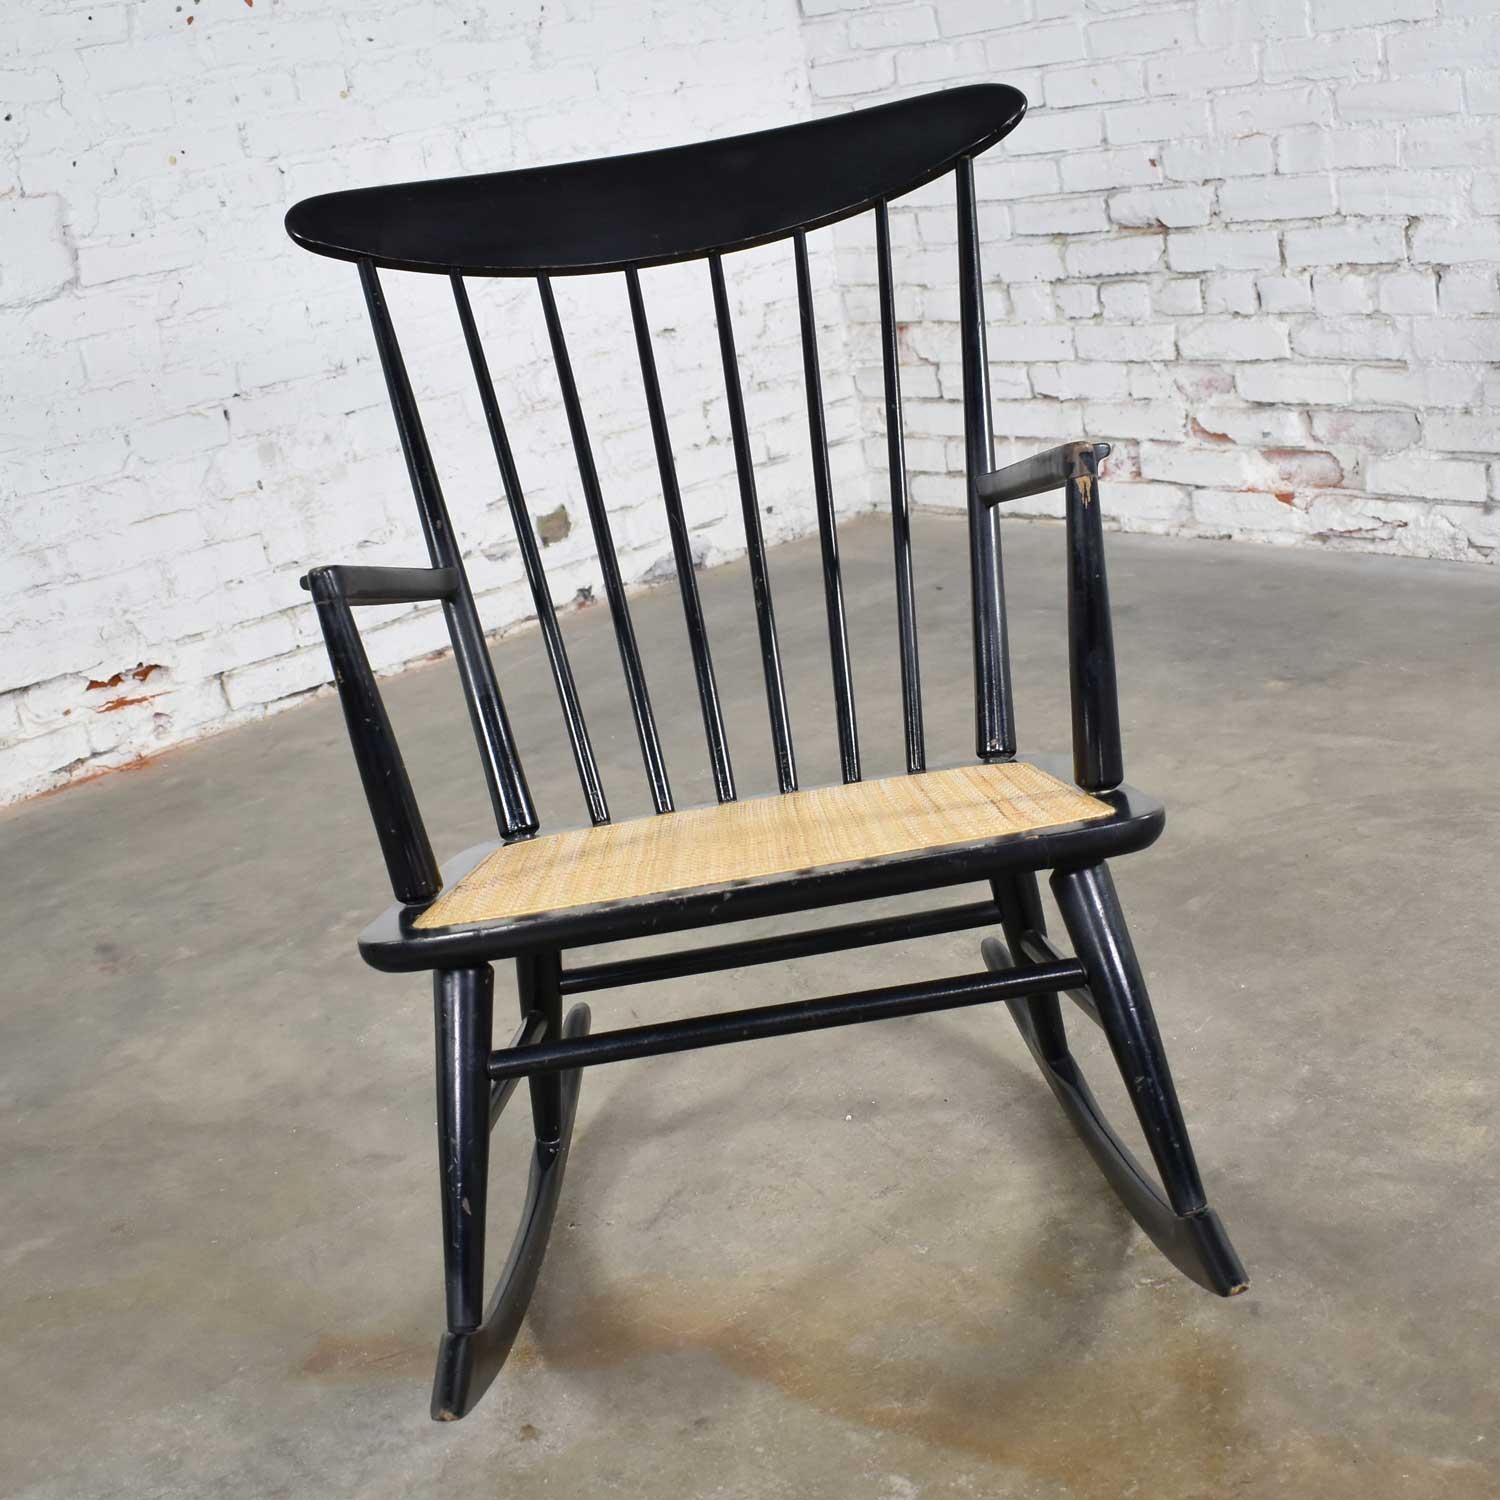 Handsome black painted midcentury spindle back rocking chair in a Scandinavian Modern or Danish modern style with a natural cane seat. This rocker is in wonderful vintage condition. The original painted finish has a nice age patina which includes